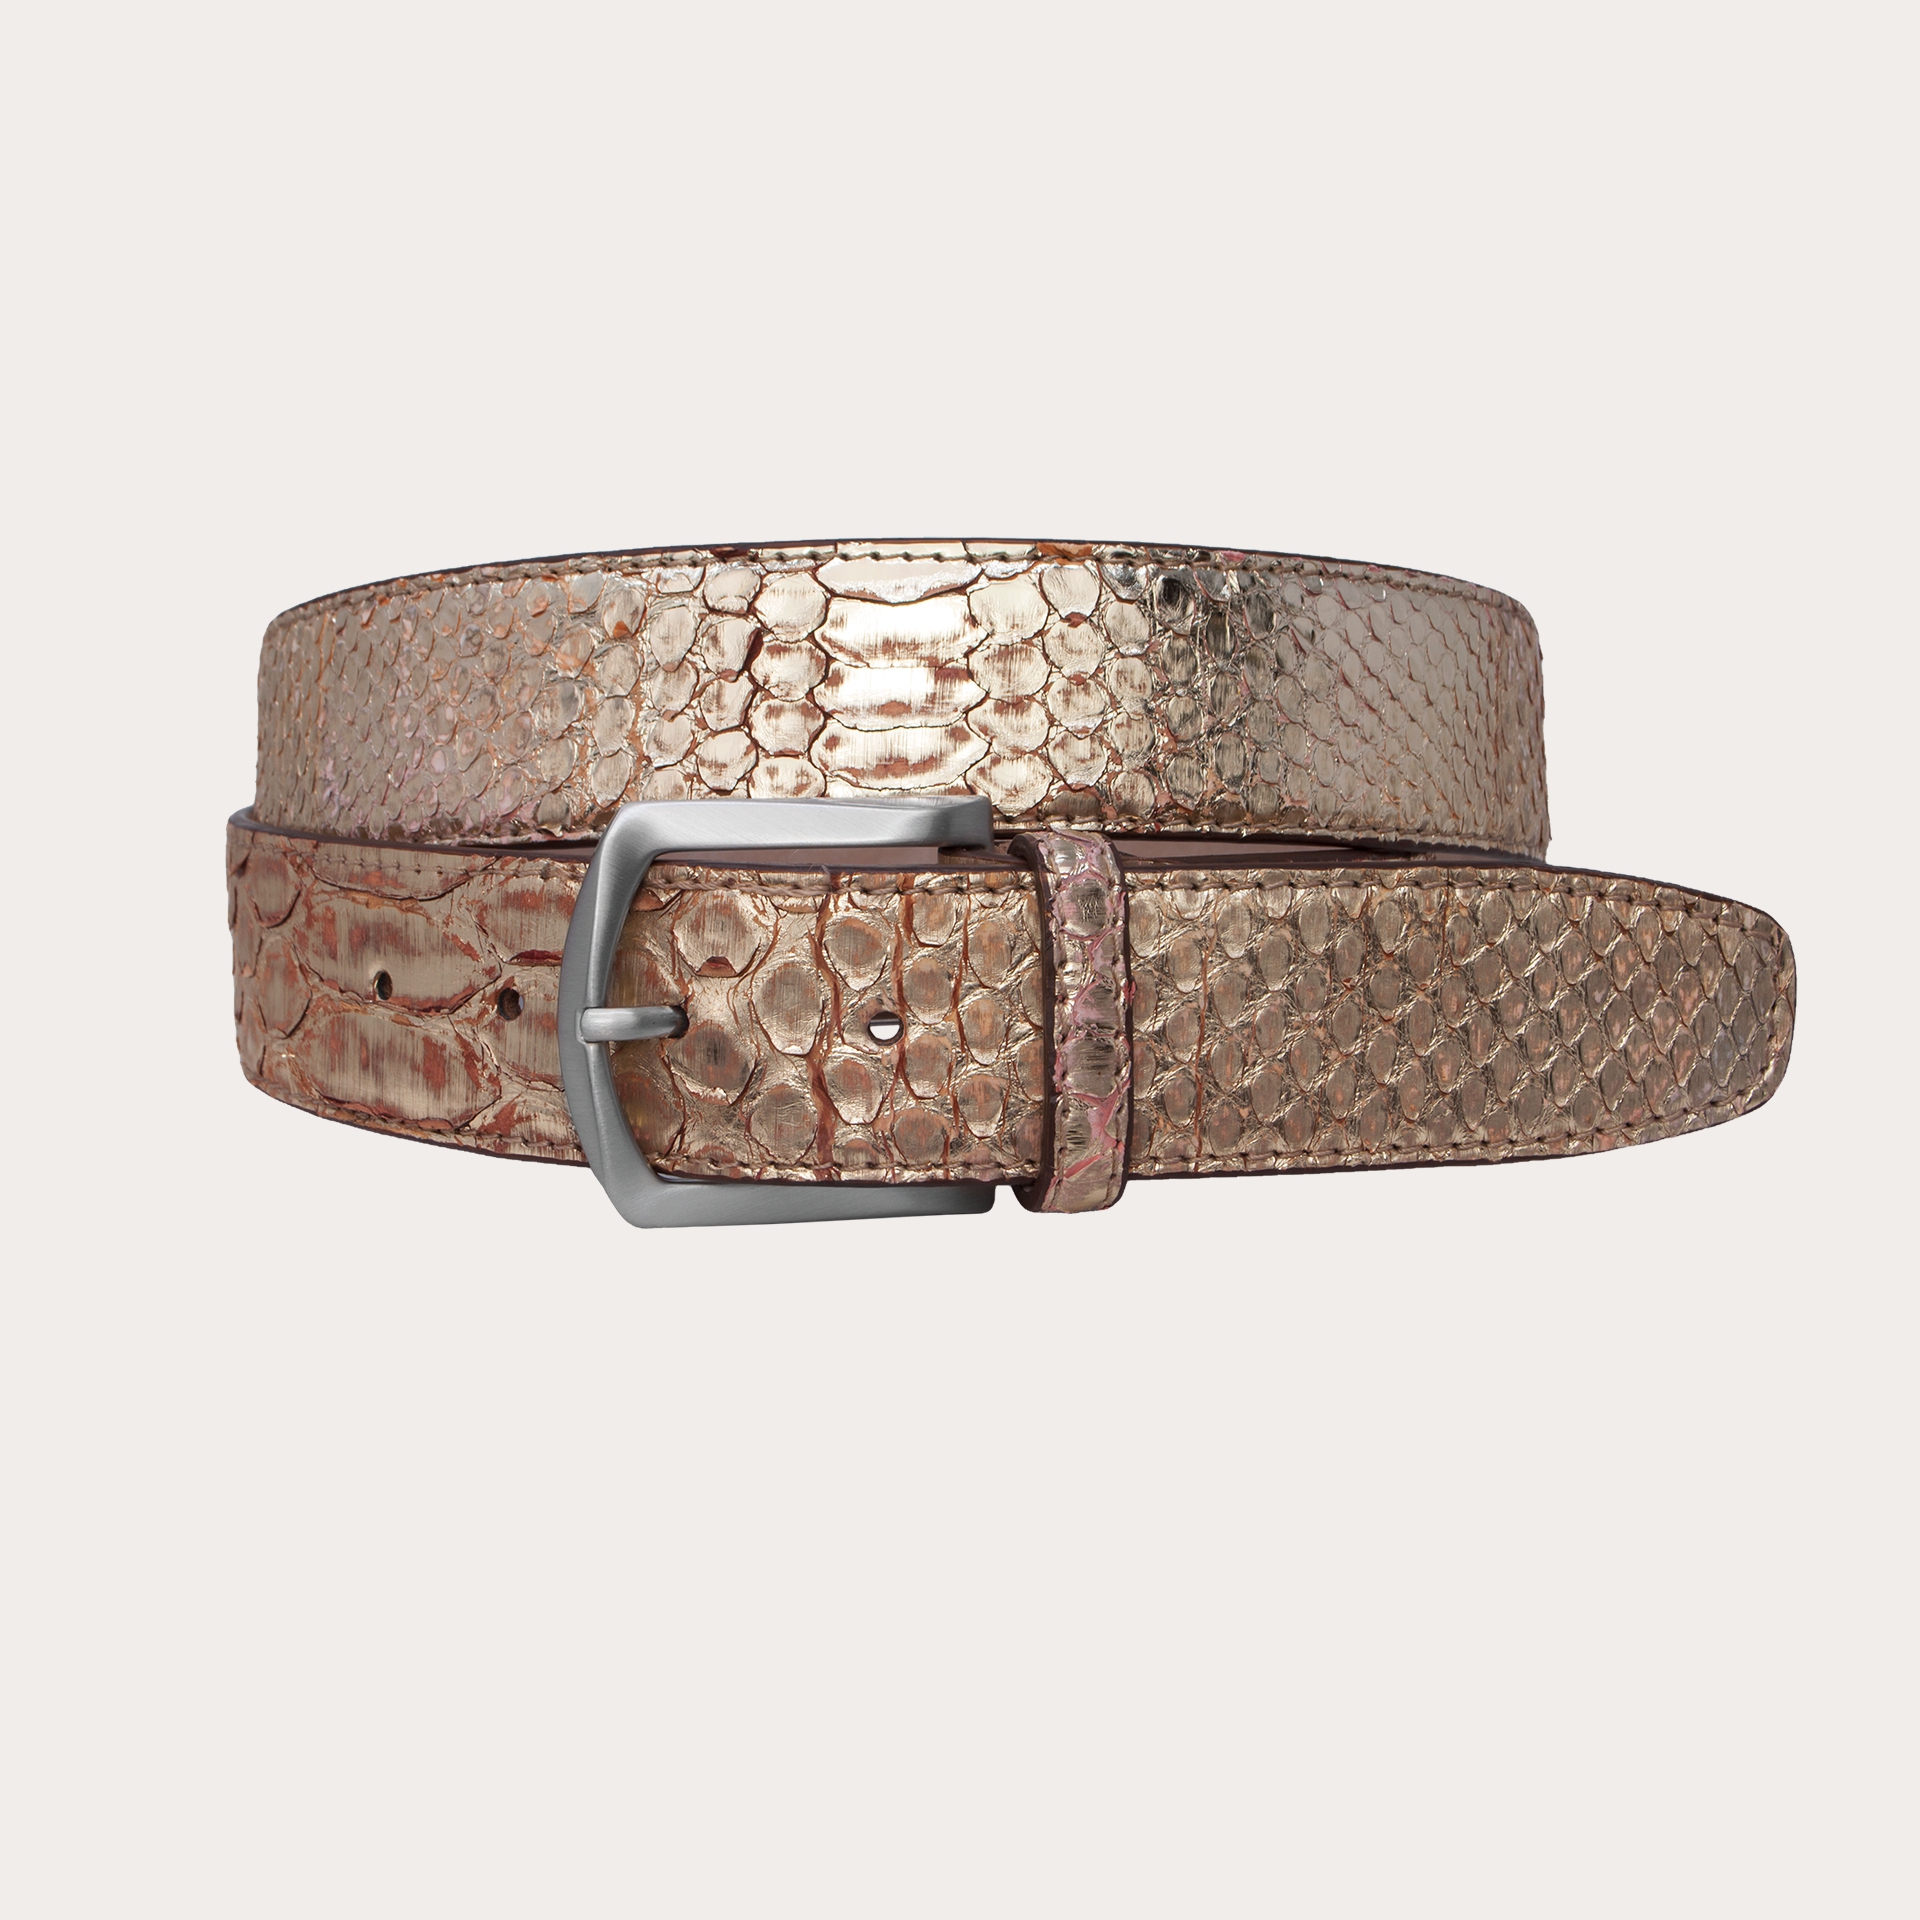 BRUCLE Tall belt in genuine python leather, nickel free gold, front cut